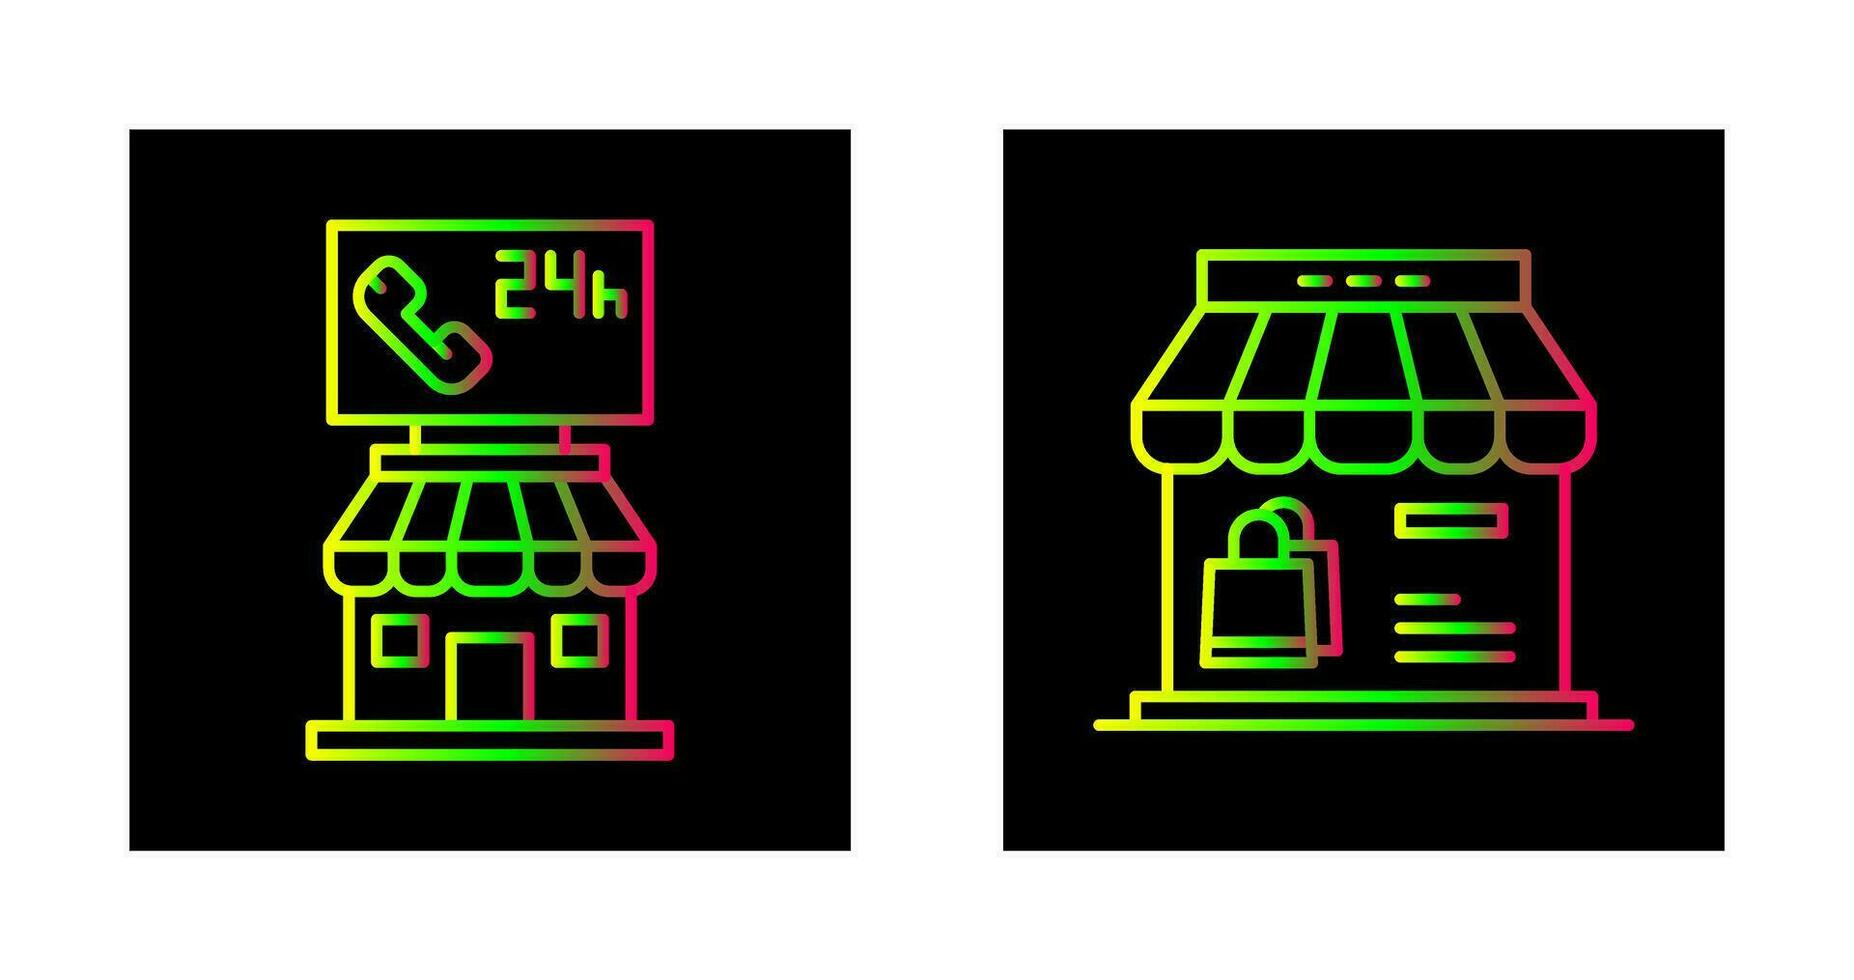 24 Hour and Store Icon vector